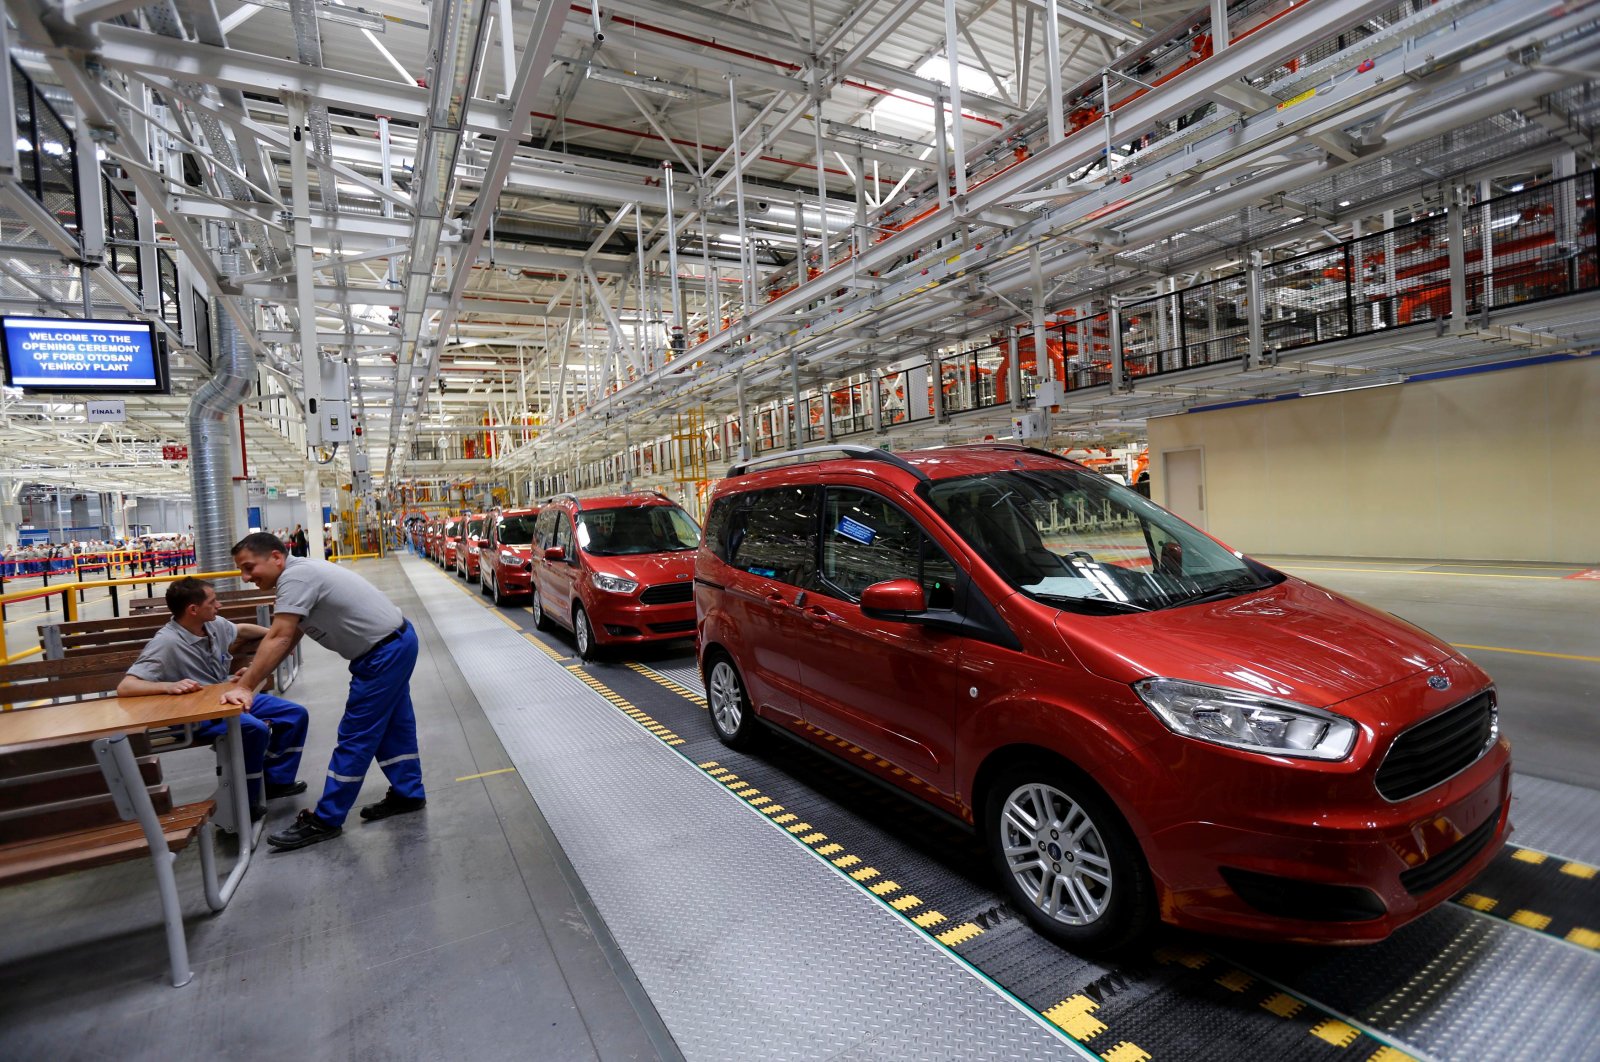 Ford Tourneo Courier light commercial vehicles are pictured at the Ford Otosan Yeniköy Factory in Kocaeli province, northwestern Turkey, May 22, 2014. (Reuters Photo)